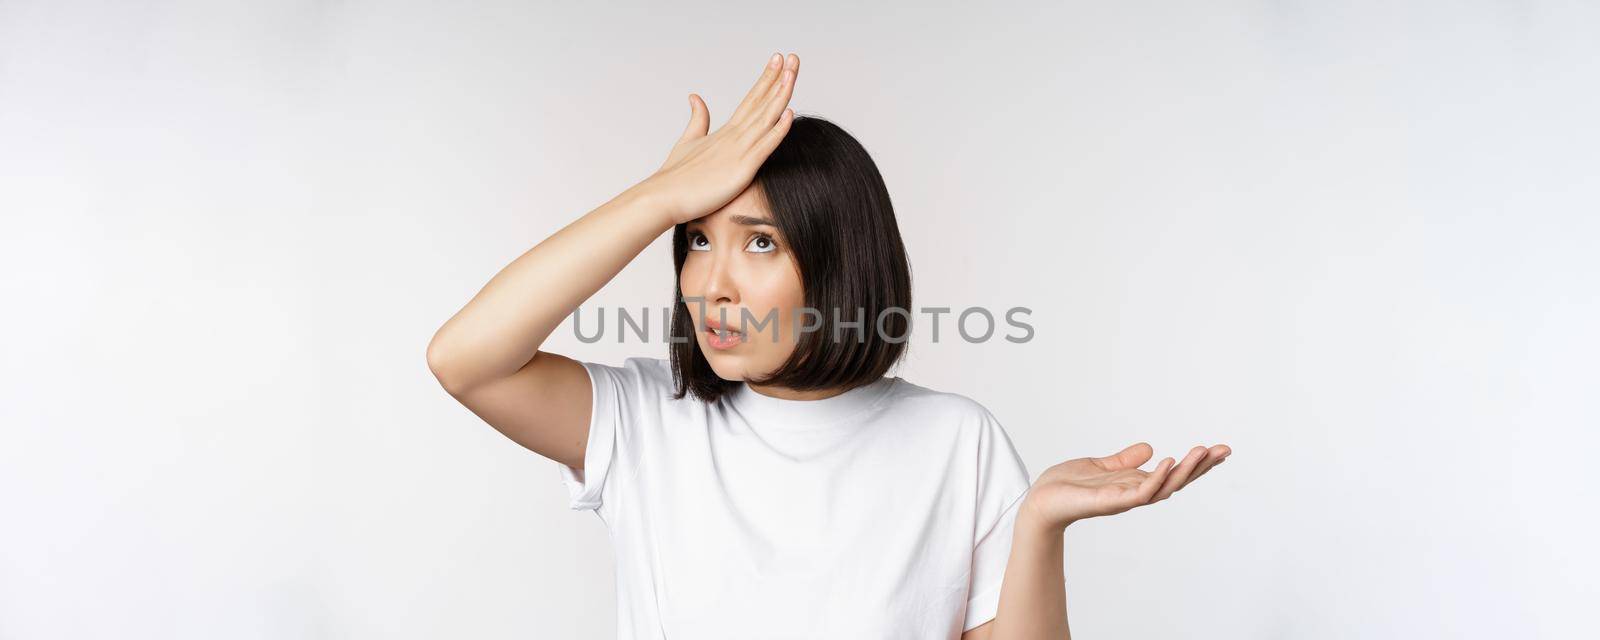 Annoyed korean girl facepalm, slap forehead and shrugging, confused by smth, standing over white background.